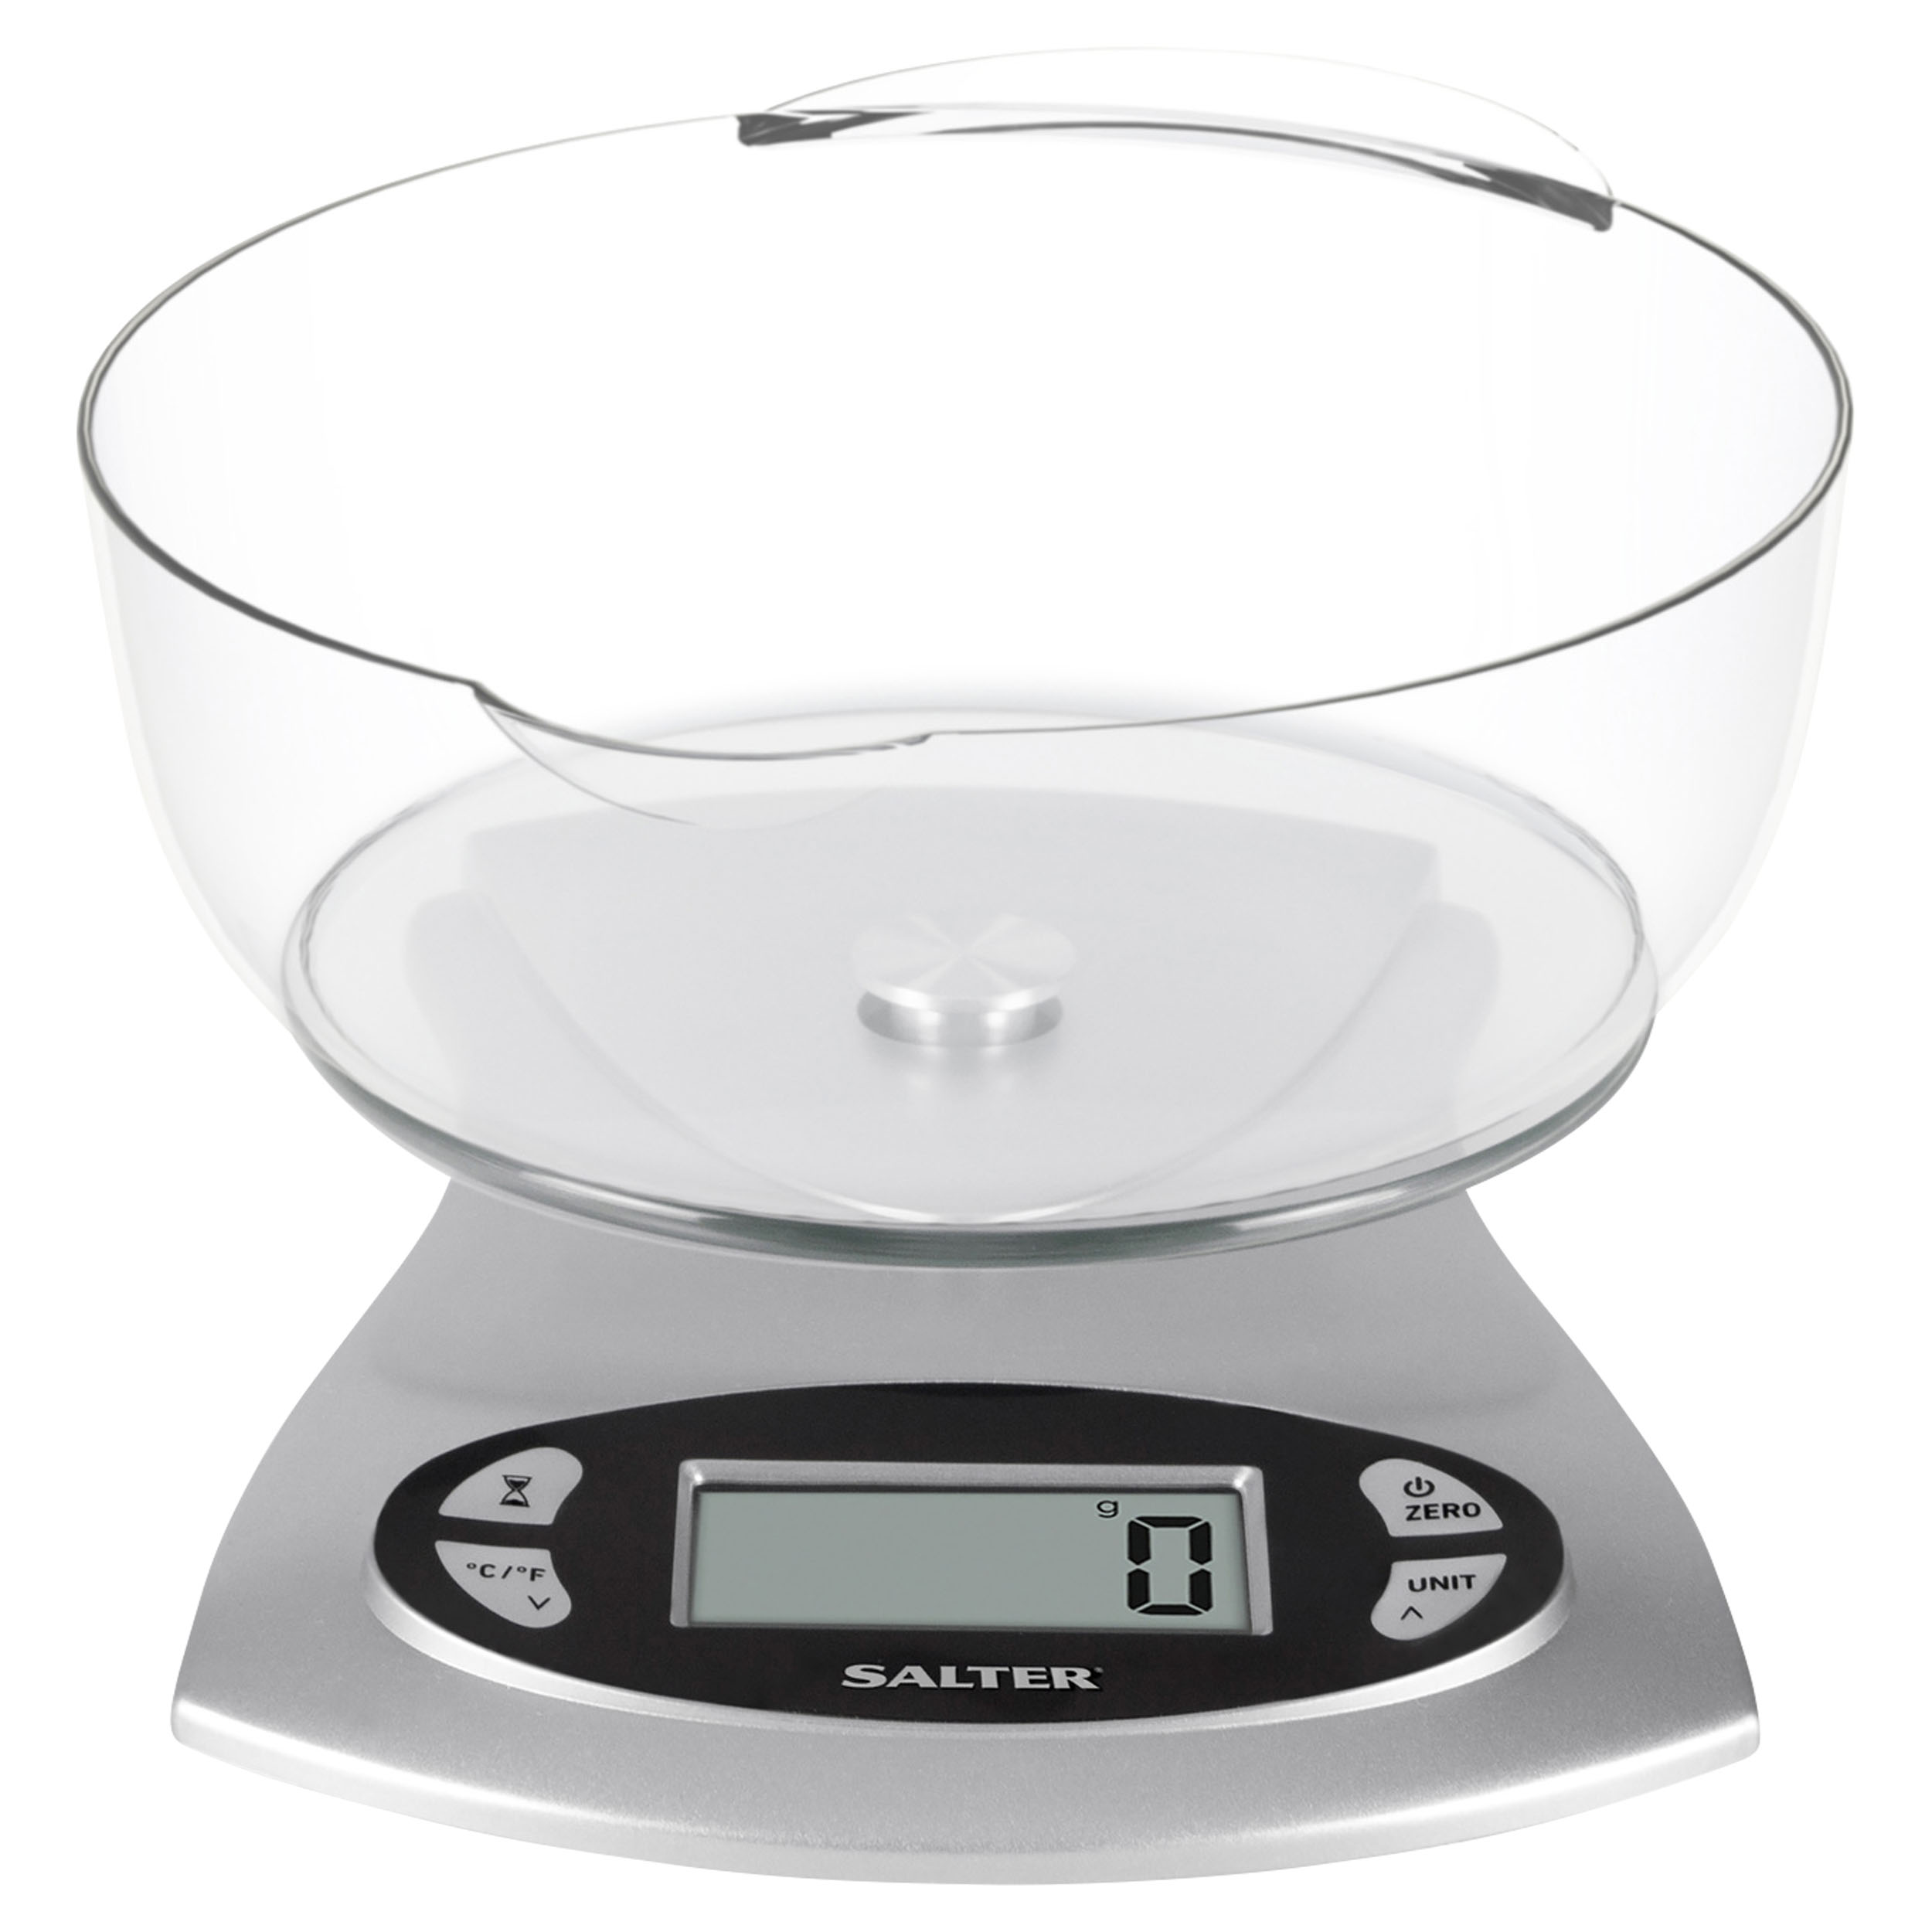   Basics Digital Kitchen Scale with LCD Display, Batteries  Included, Weighs up to 11 pounds, Black and Stainless Steel: Home & Kitchen